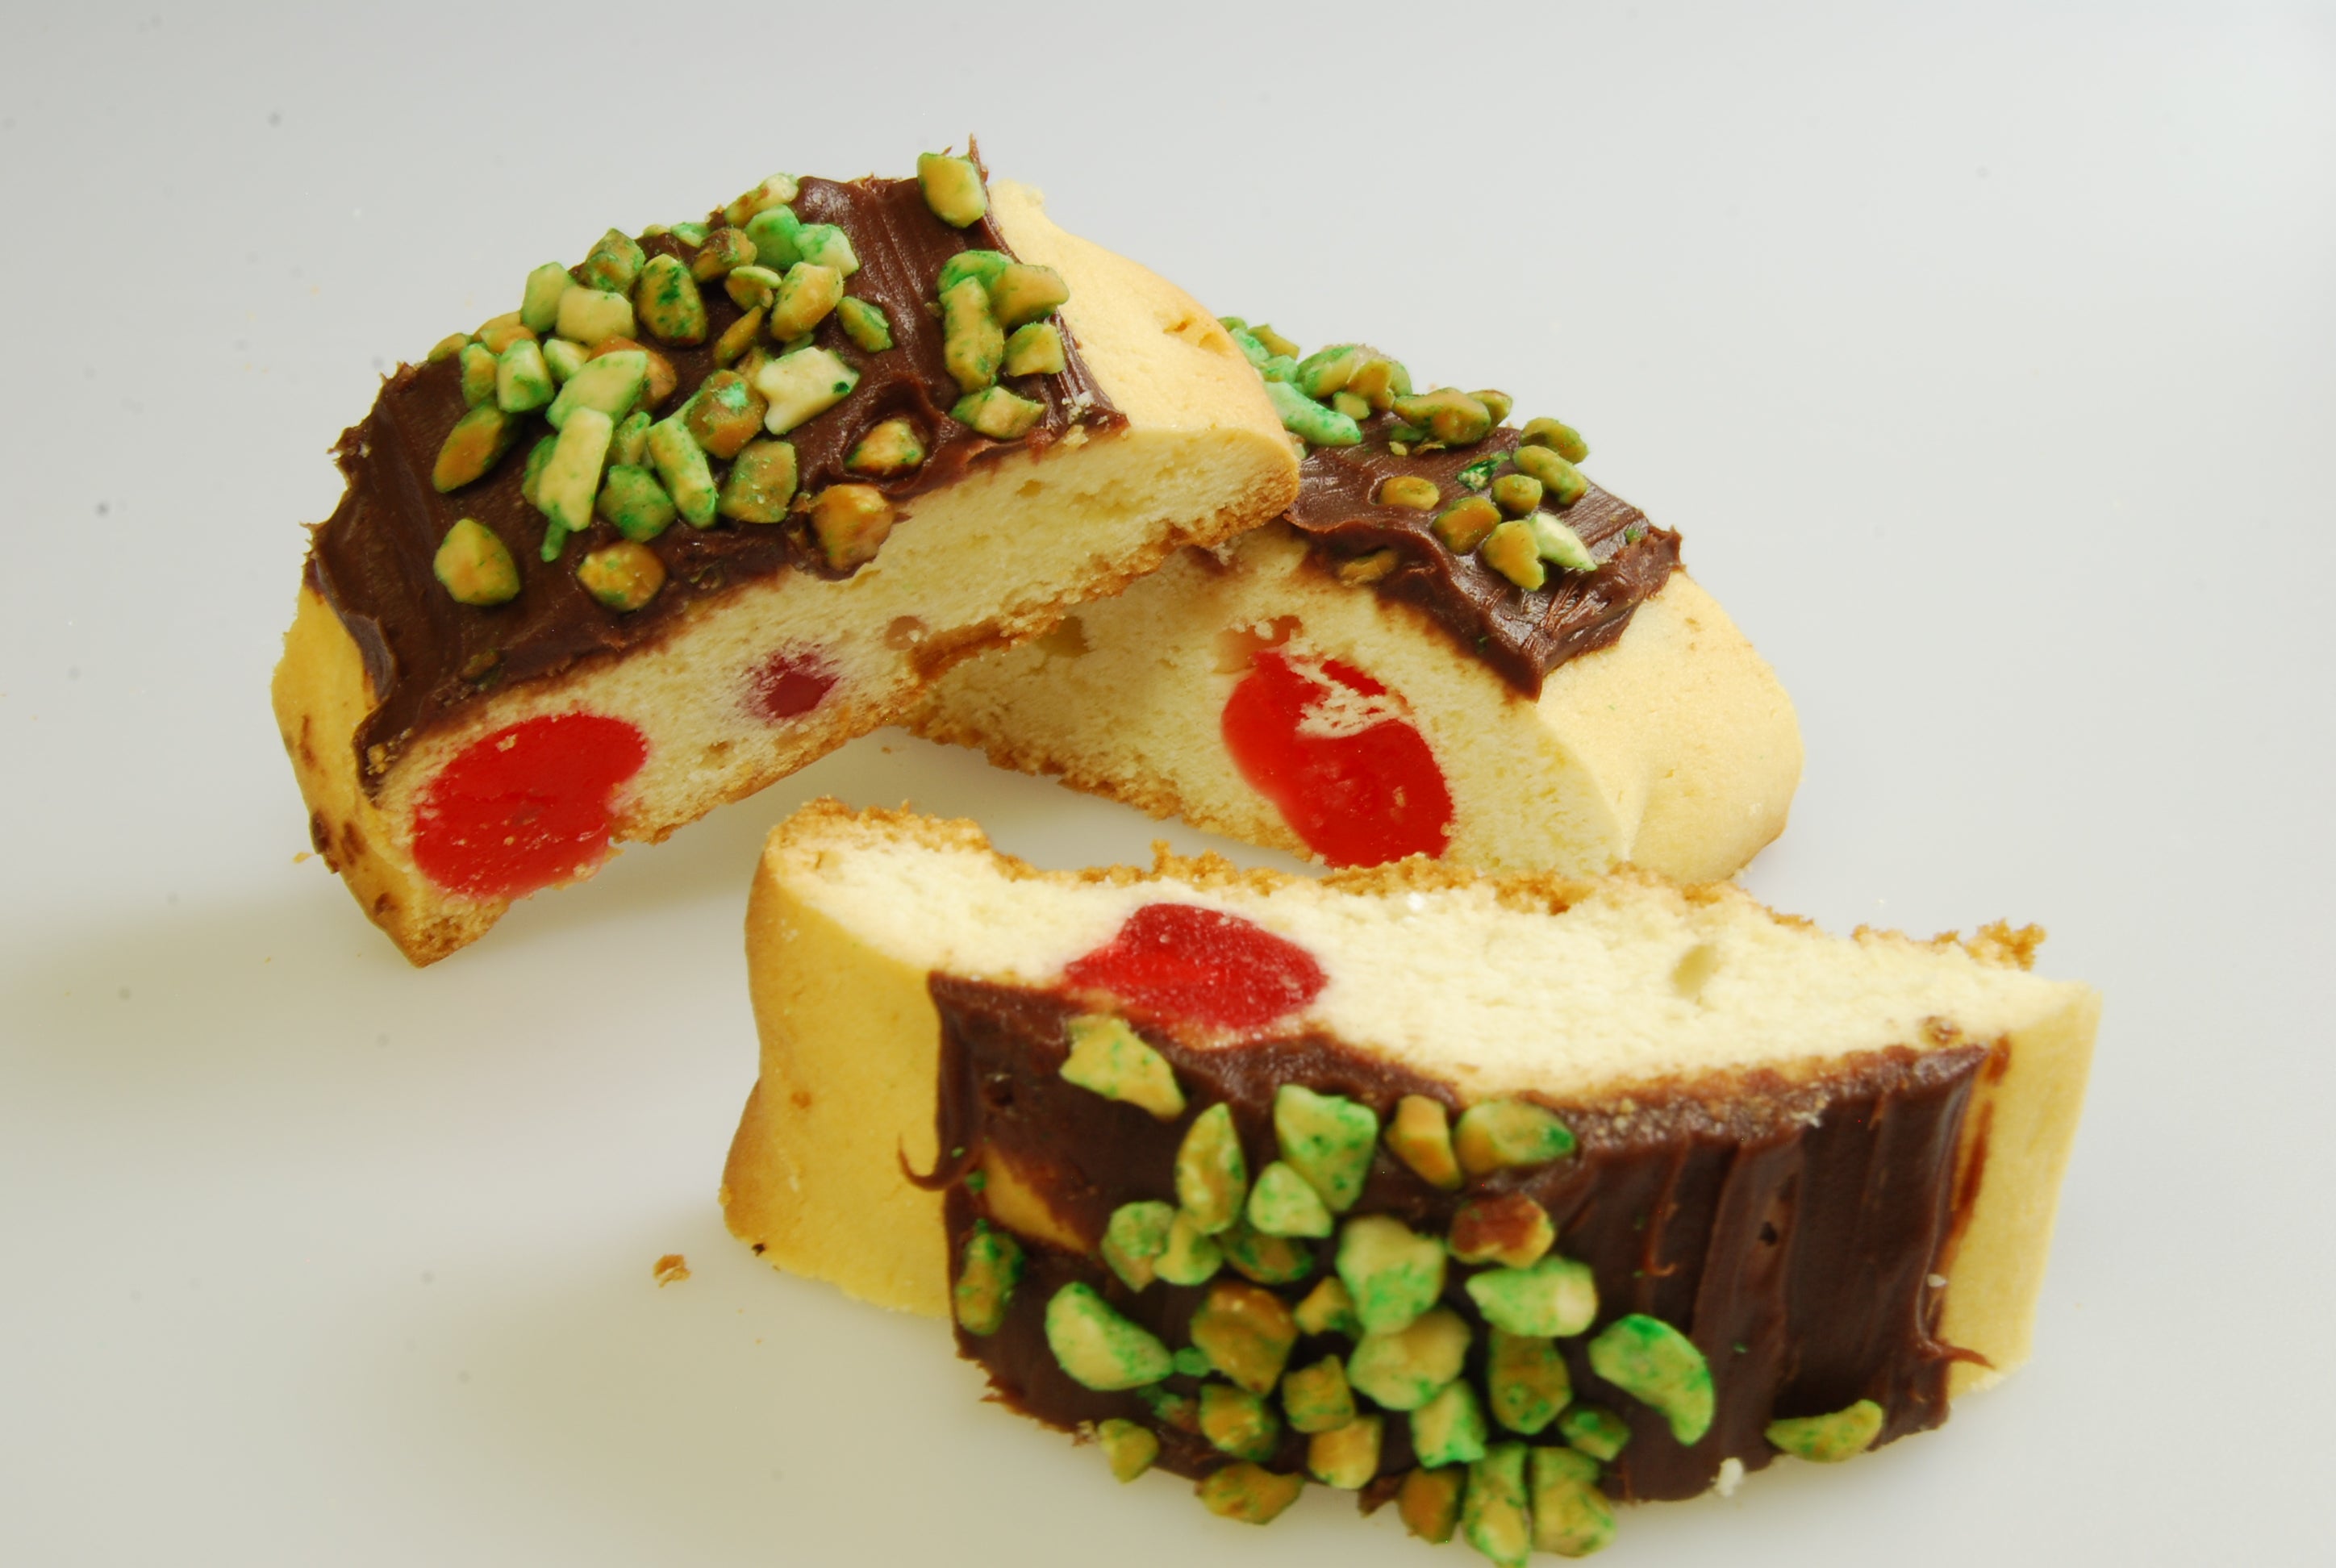 Slices with Fruits and Nuts